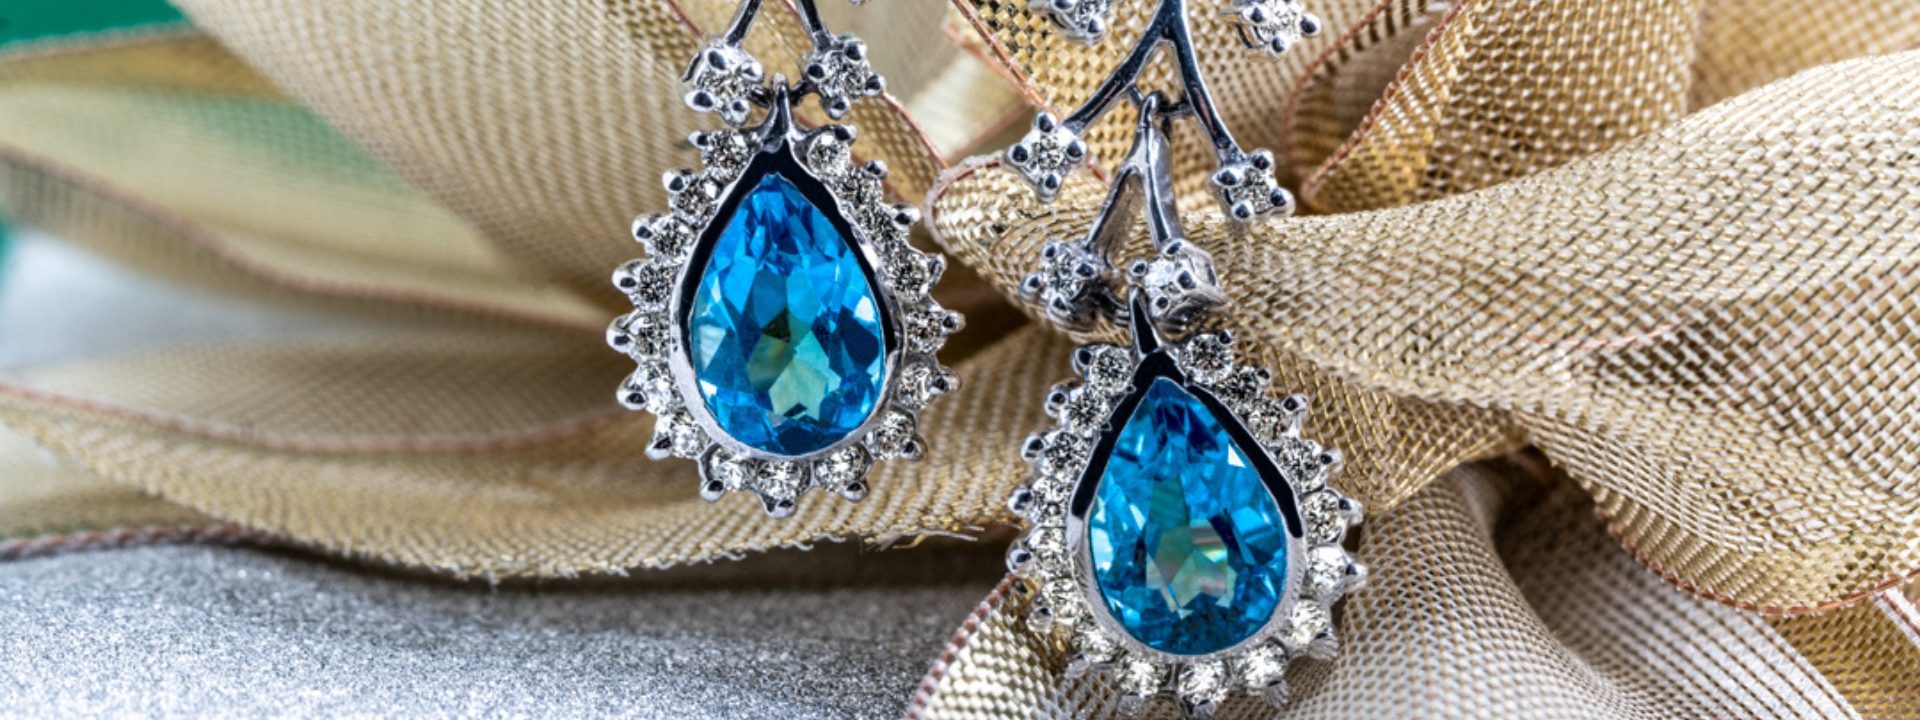 White gold vine drop earrings set with pear cut blue topaz and diamond haloes.